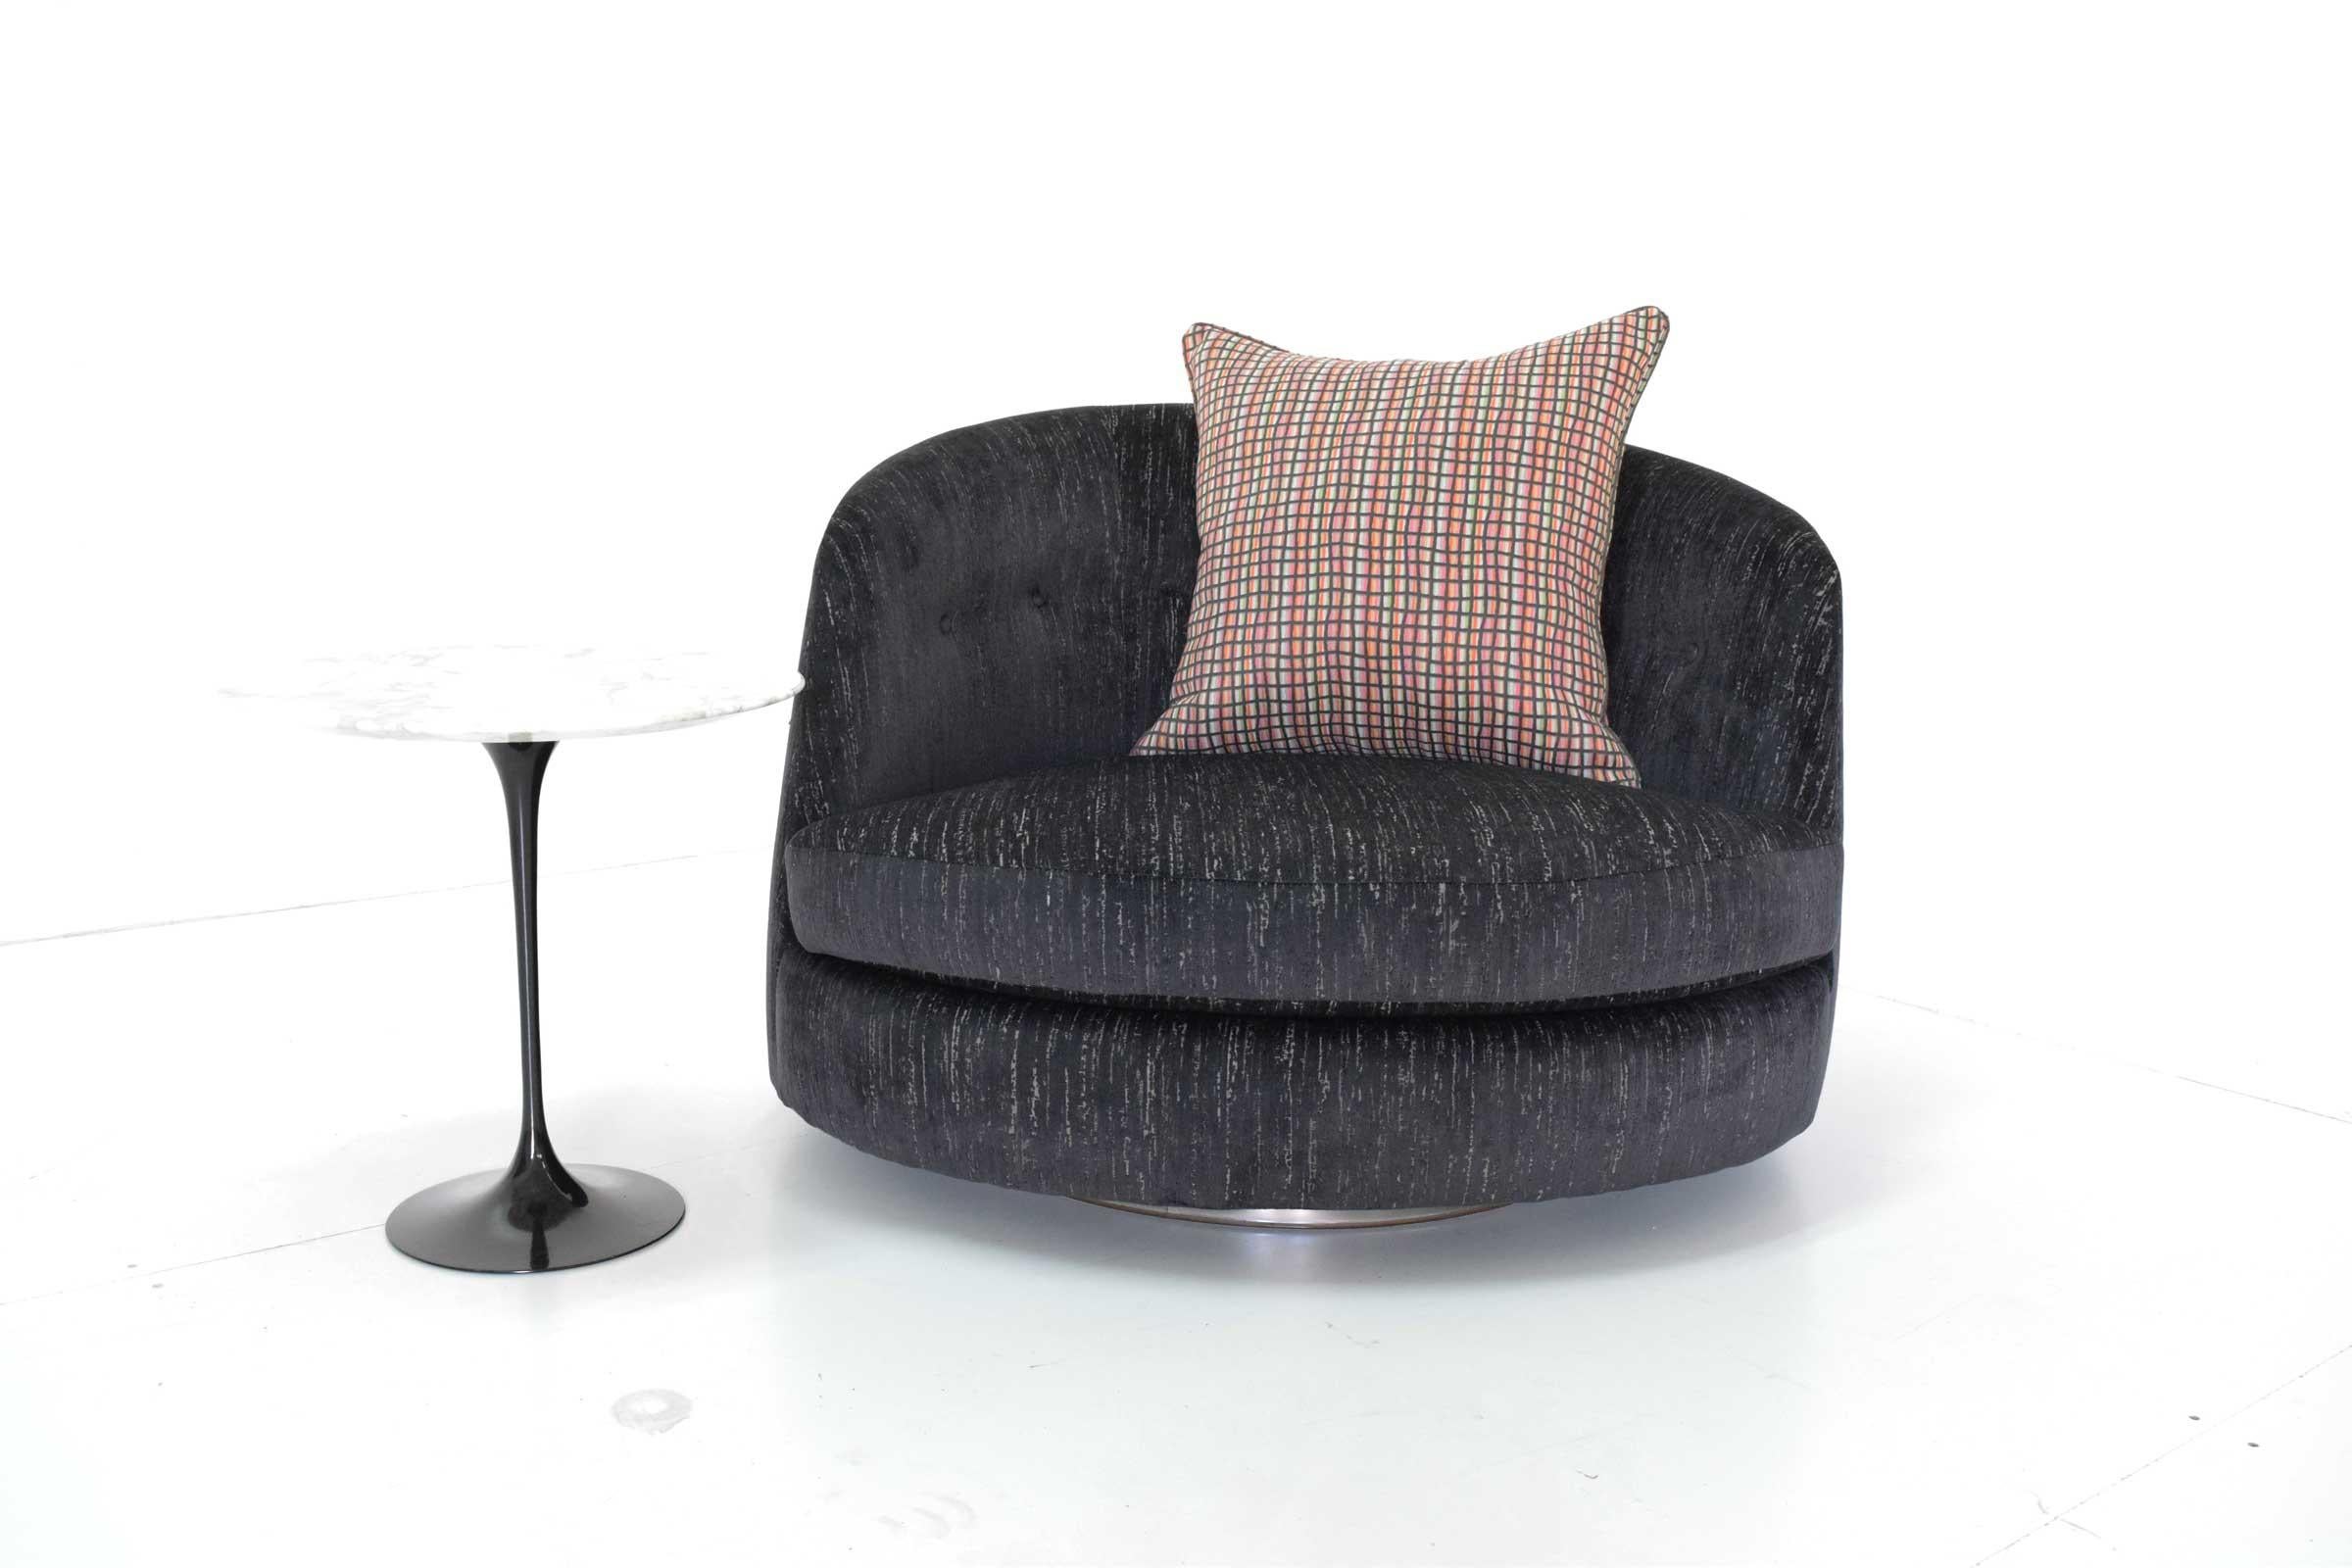 New upholstery. Milo Baughman for Thayer Coggin. Upholstered in a black cut velvet these oversized Milo Baughman tub chairs look great. Chrome base.